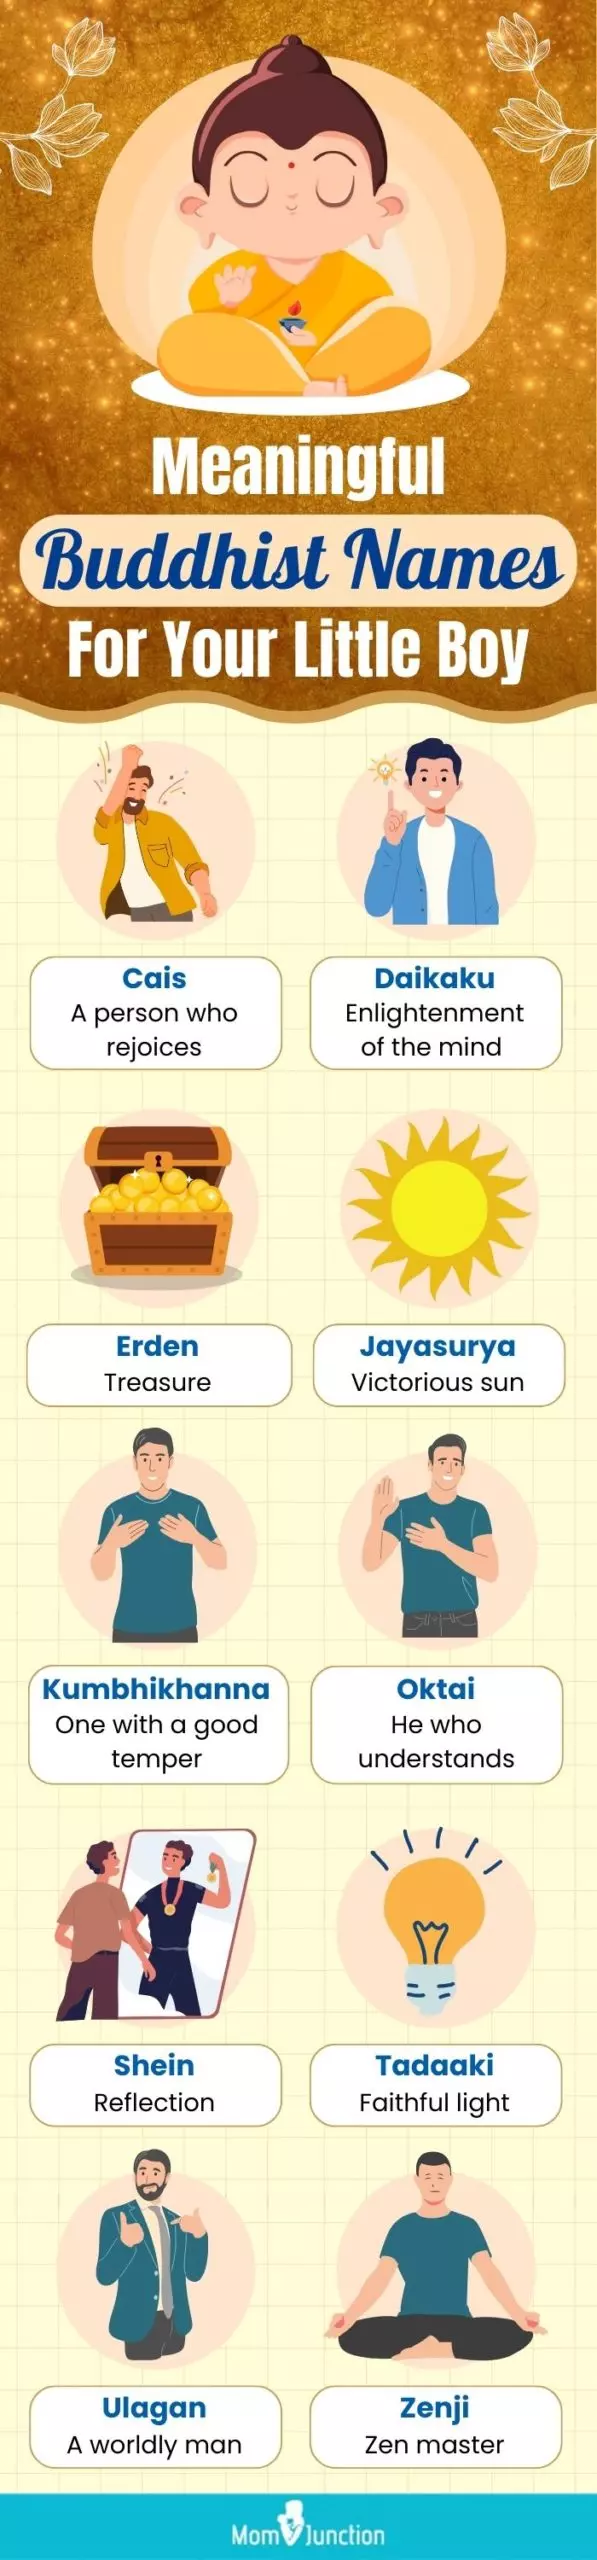 meaningful buddhist names for your little boy (infographic)